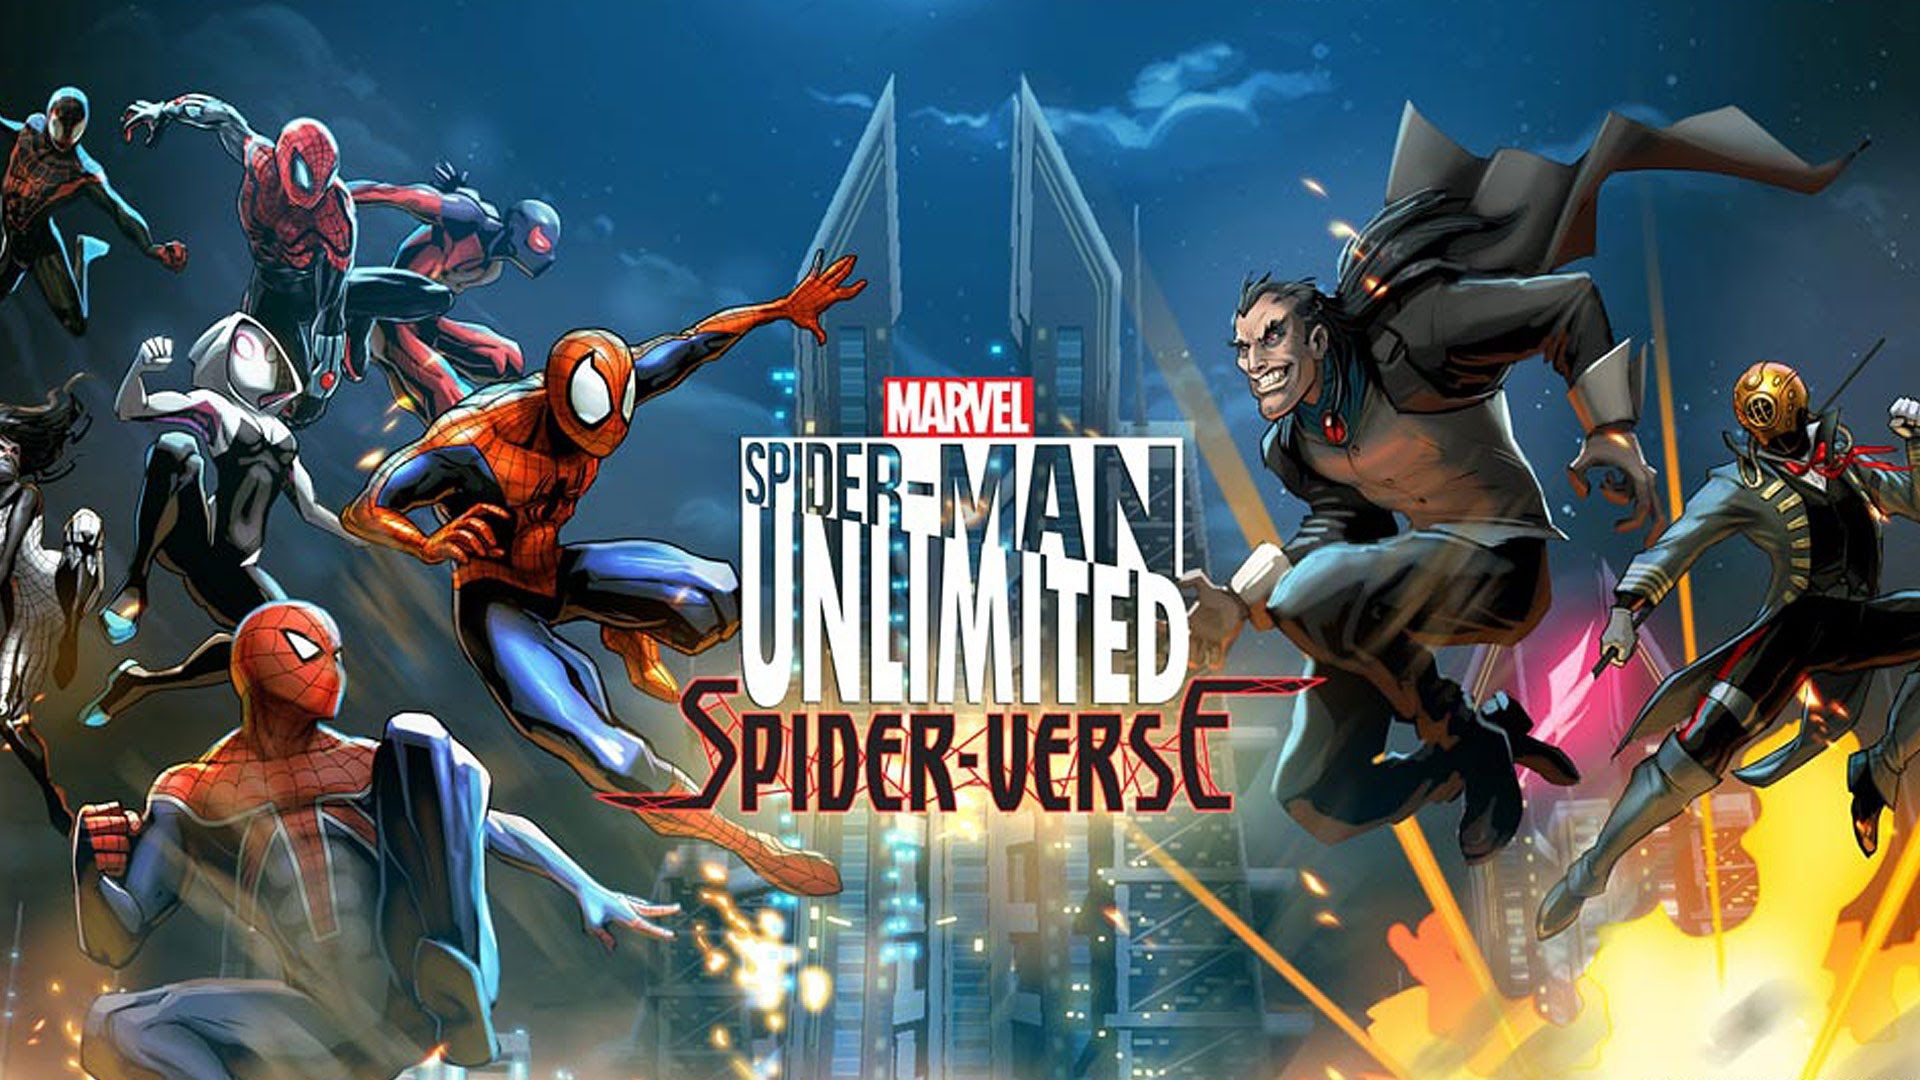 SpiderManUnlimited